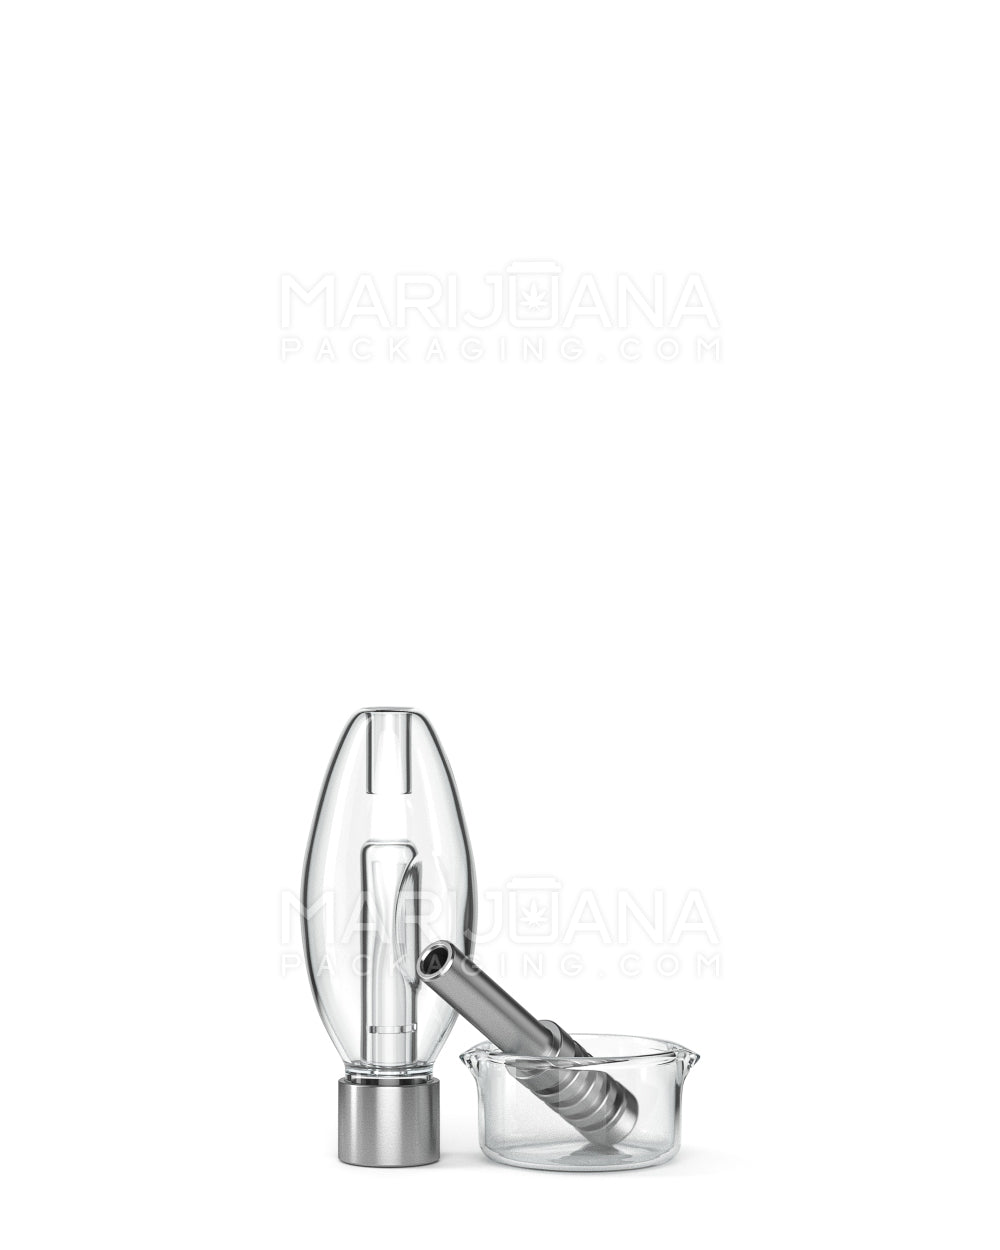 Nectar Collector Dab Pipe w/ Titanium Tip | 5.5in Long - 14mm Attachment - Clear - 3